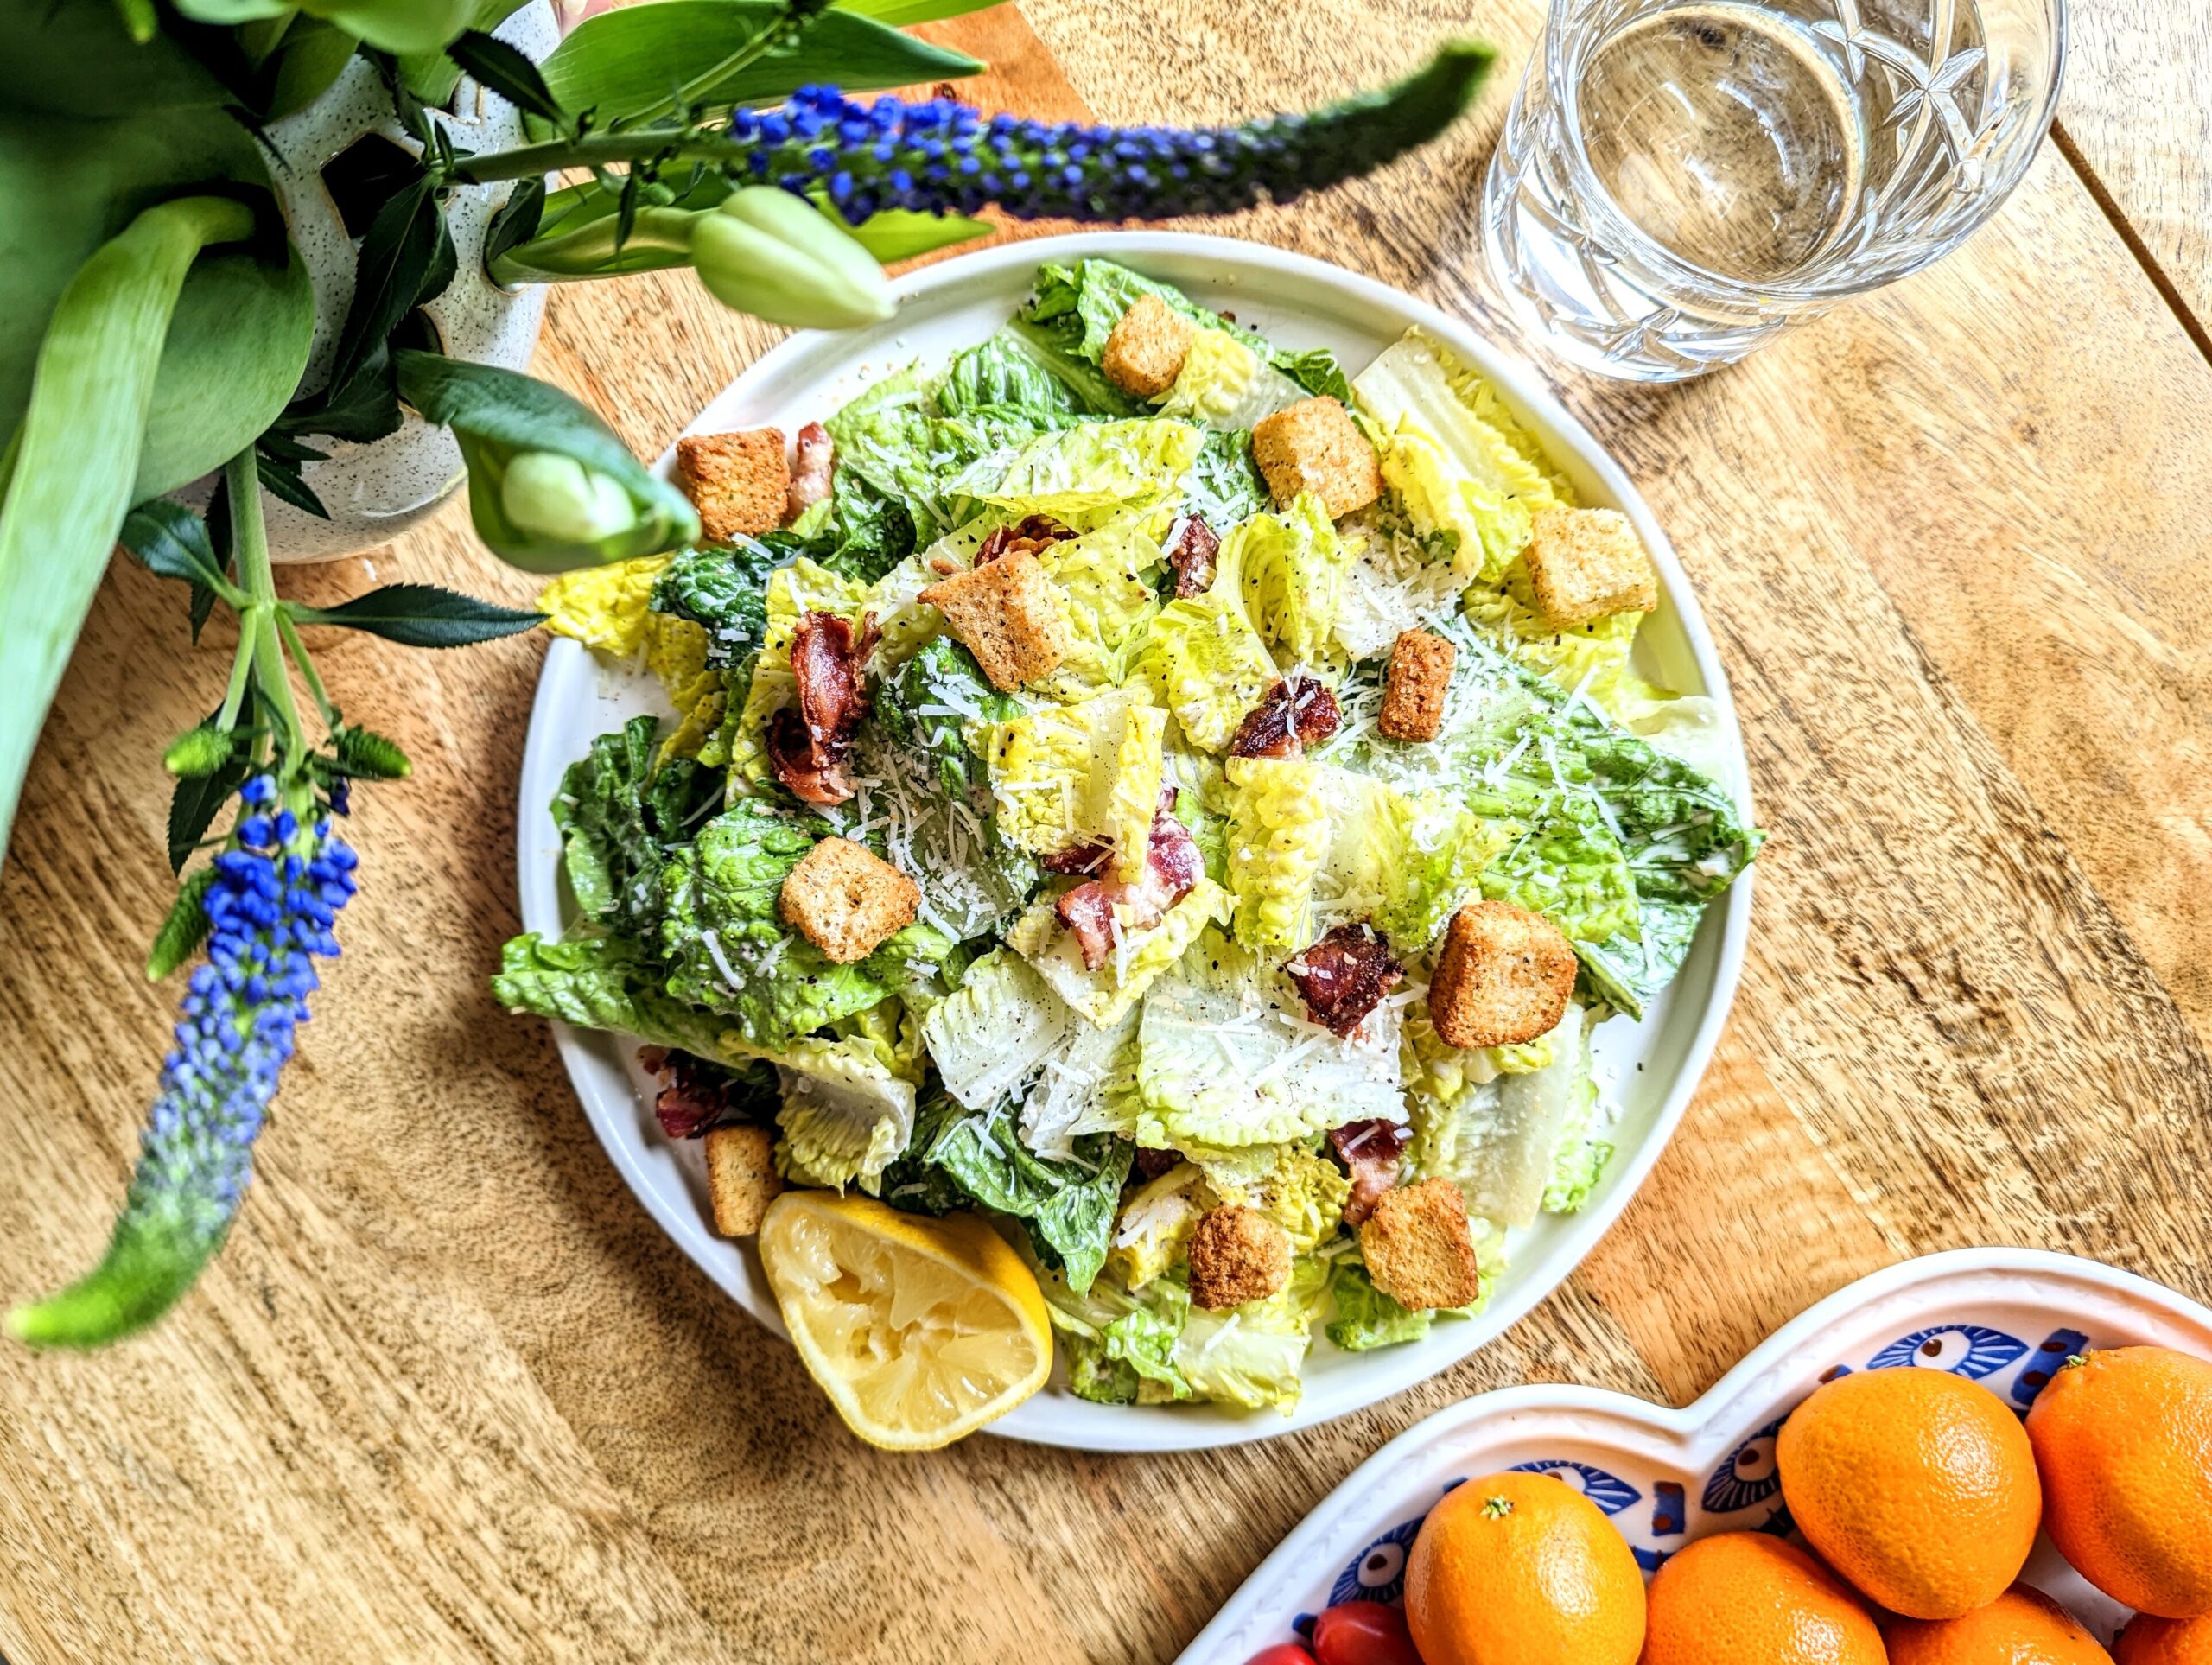 A large plate of Caesar Salad with bacon and homemade croutons. Purple Veronica flowers are seen in the top left corner and a platter of orange mandarins can be seen in the bottom right corner.